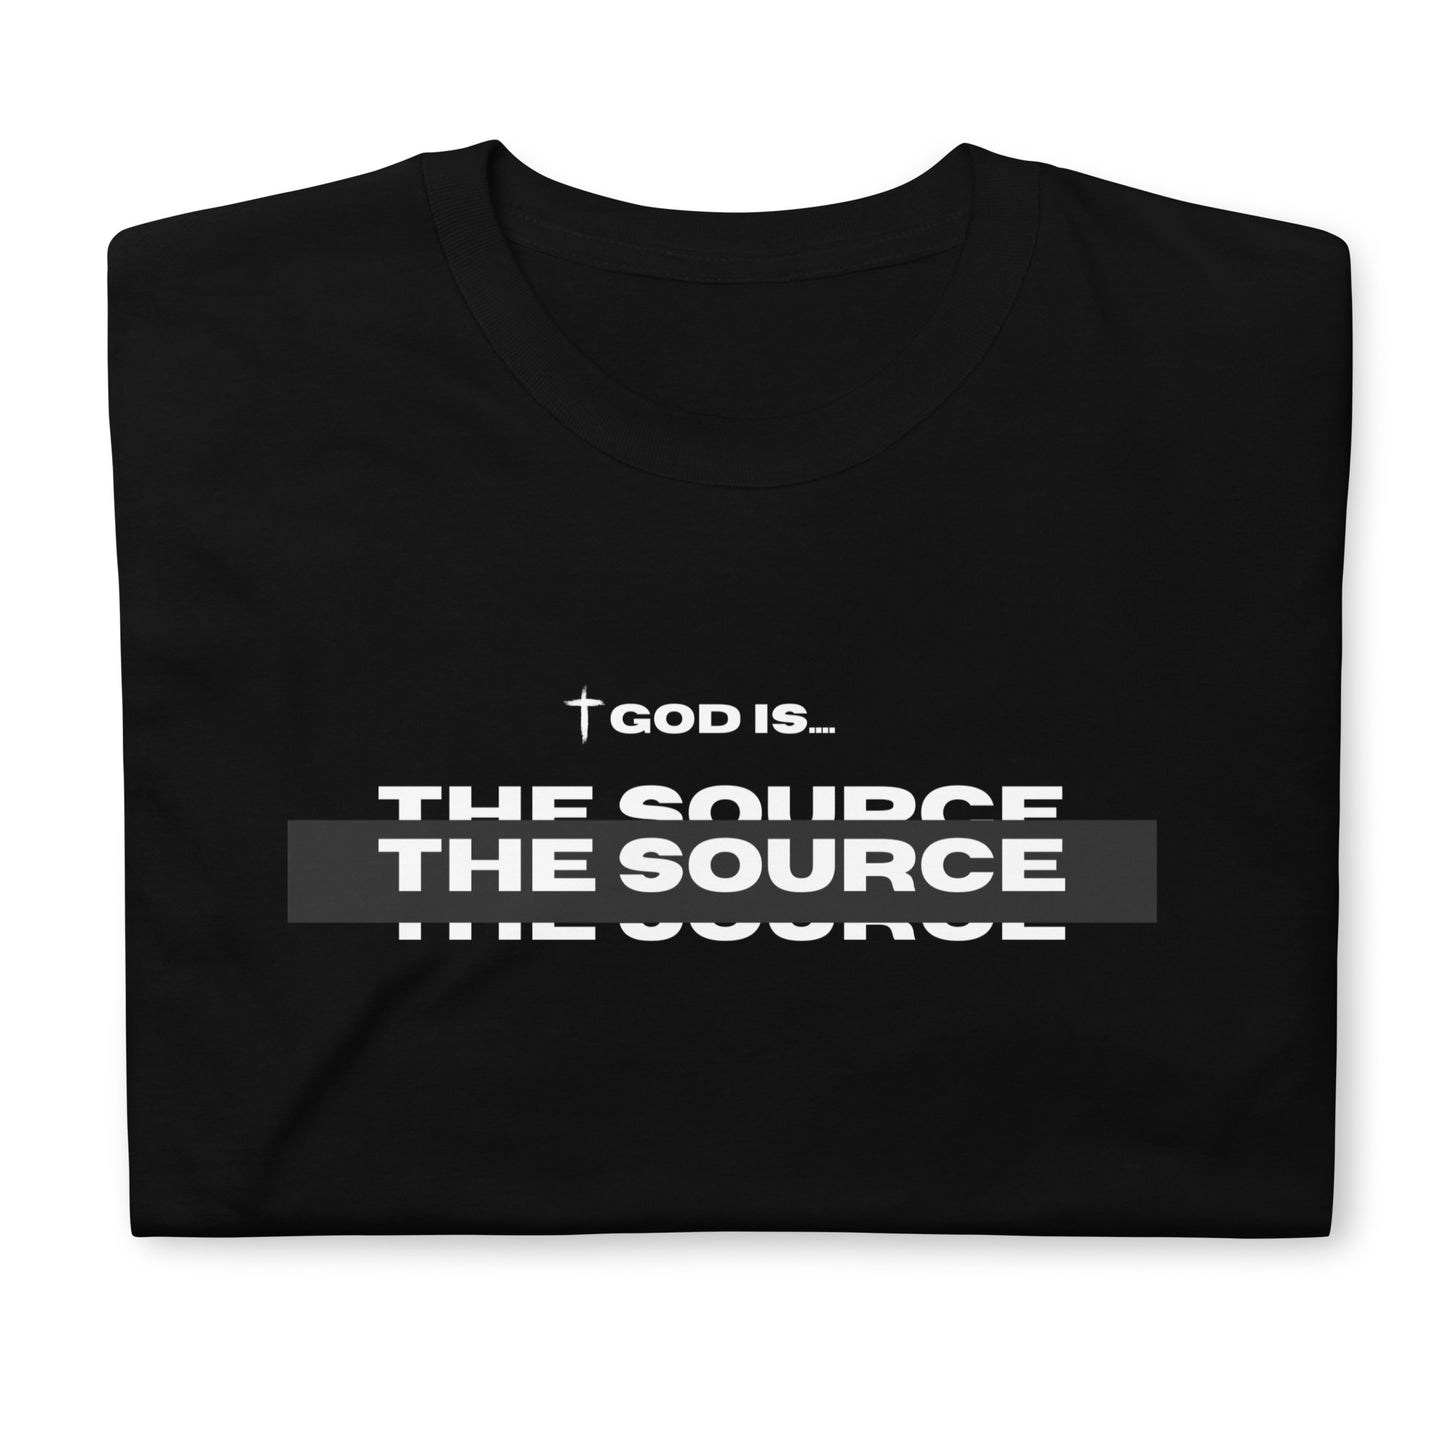 The Source (God IS Line)